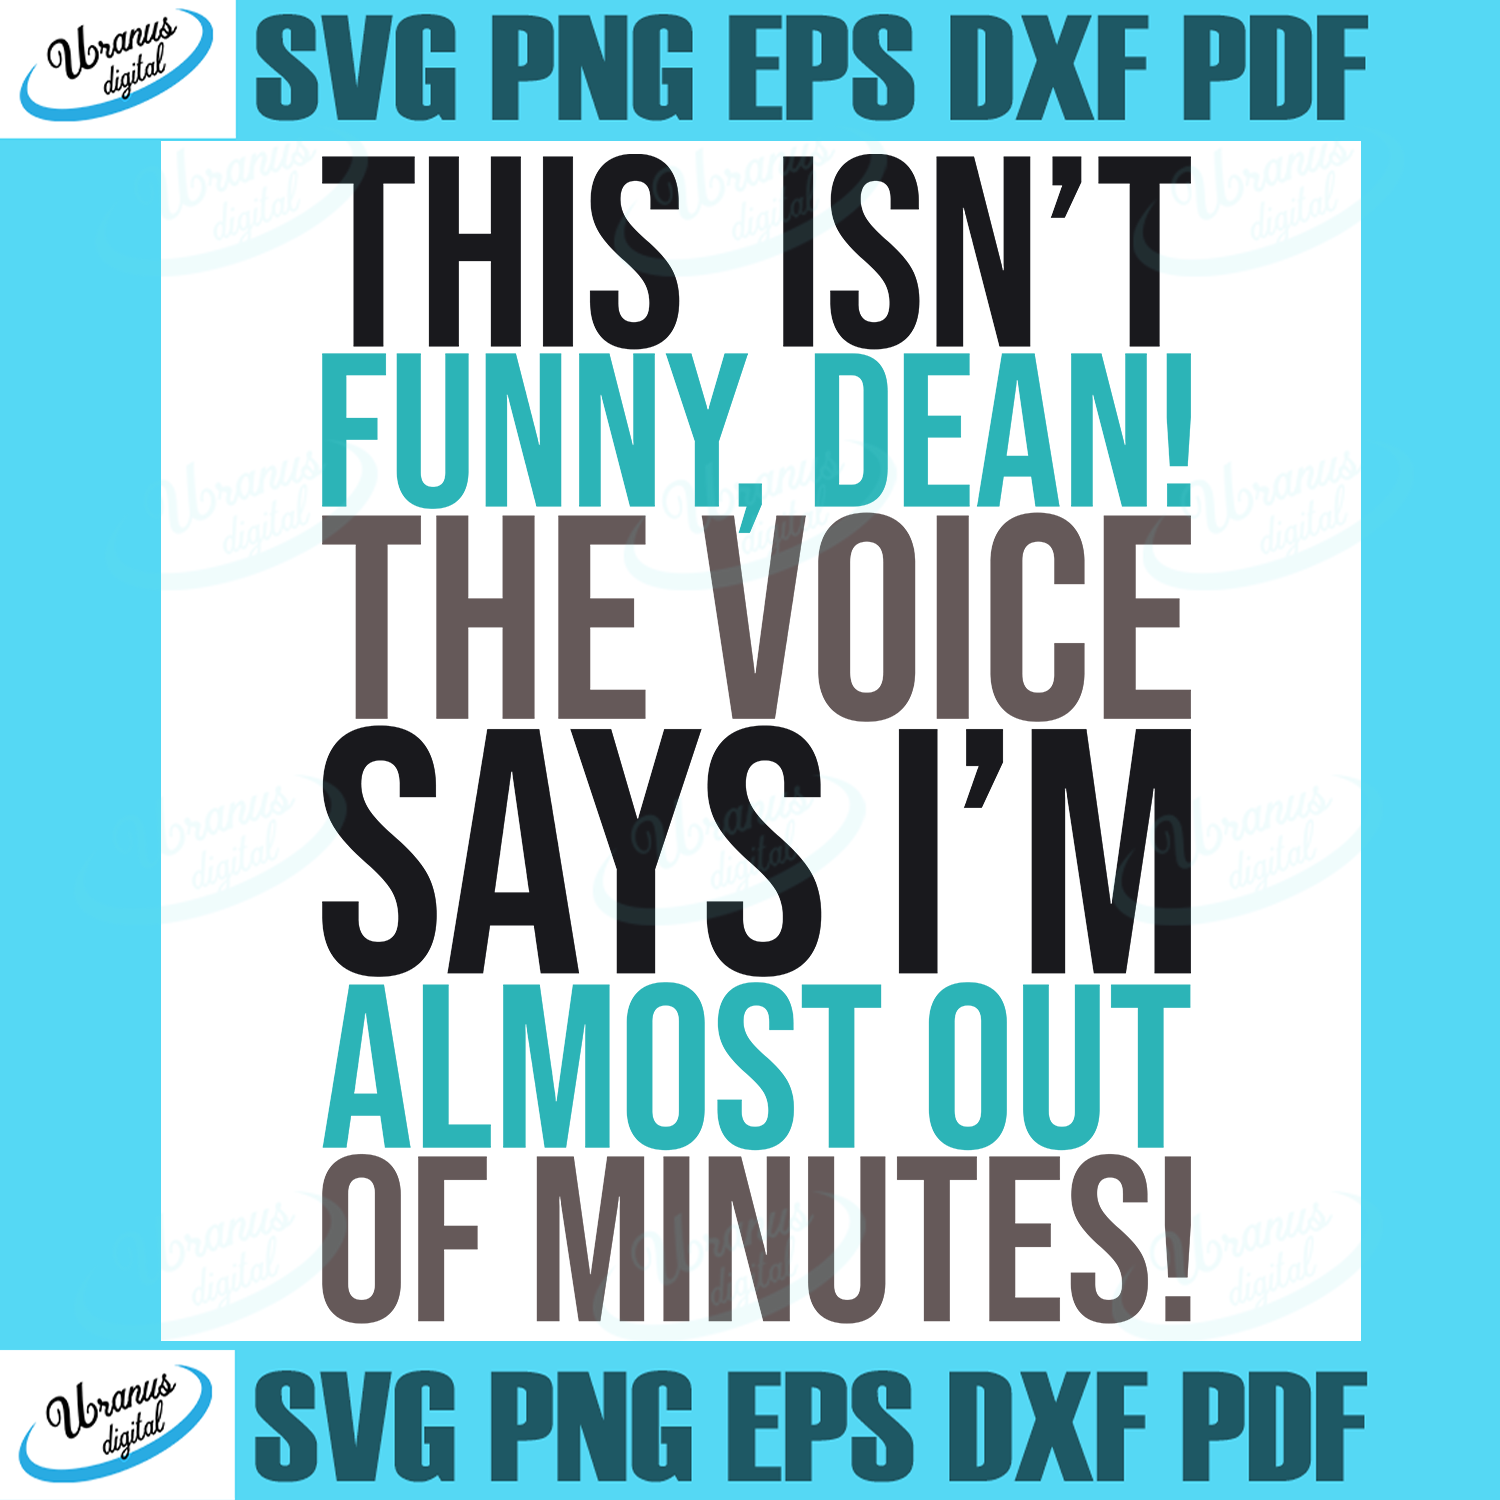 Download Trending Svg This Is Not Funny Dean Svg Svg The Voice Svg Funny Quotes Svg Saying Shirt Svg Svg Cricut Silhouette Svg Files Cricut Svg Silhouette Svg Svg Designs Vinyl Svg Uranusdigital